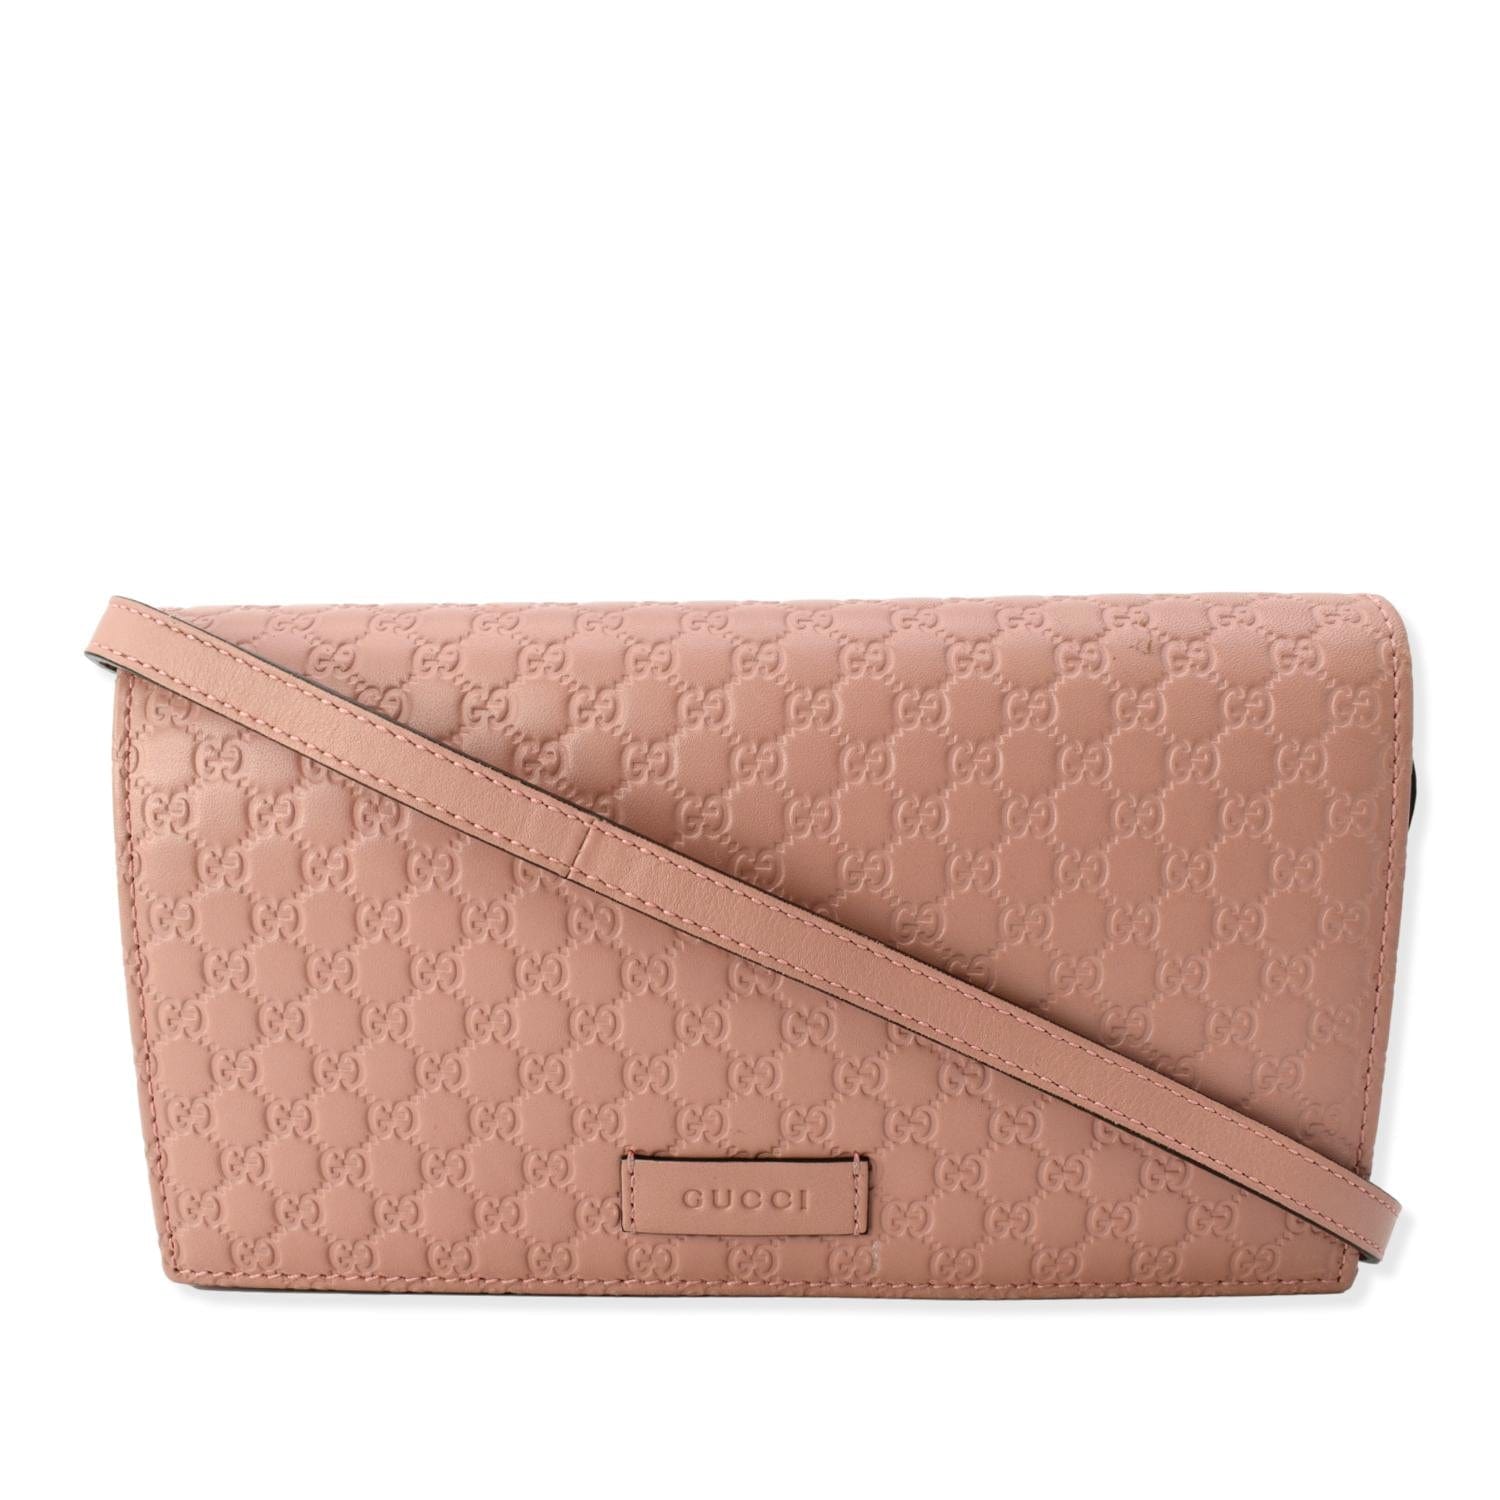 Gucci Micro GG Guccissima Leather Crossbody Wallet Pink 466507